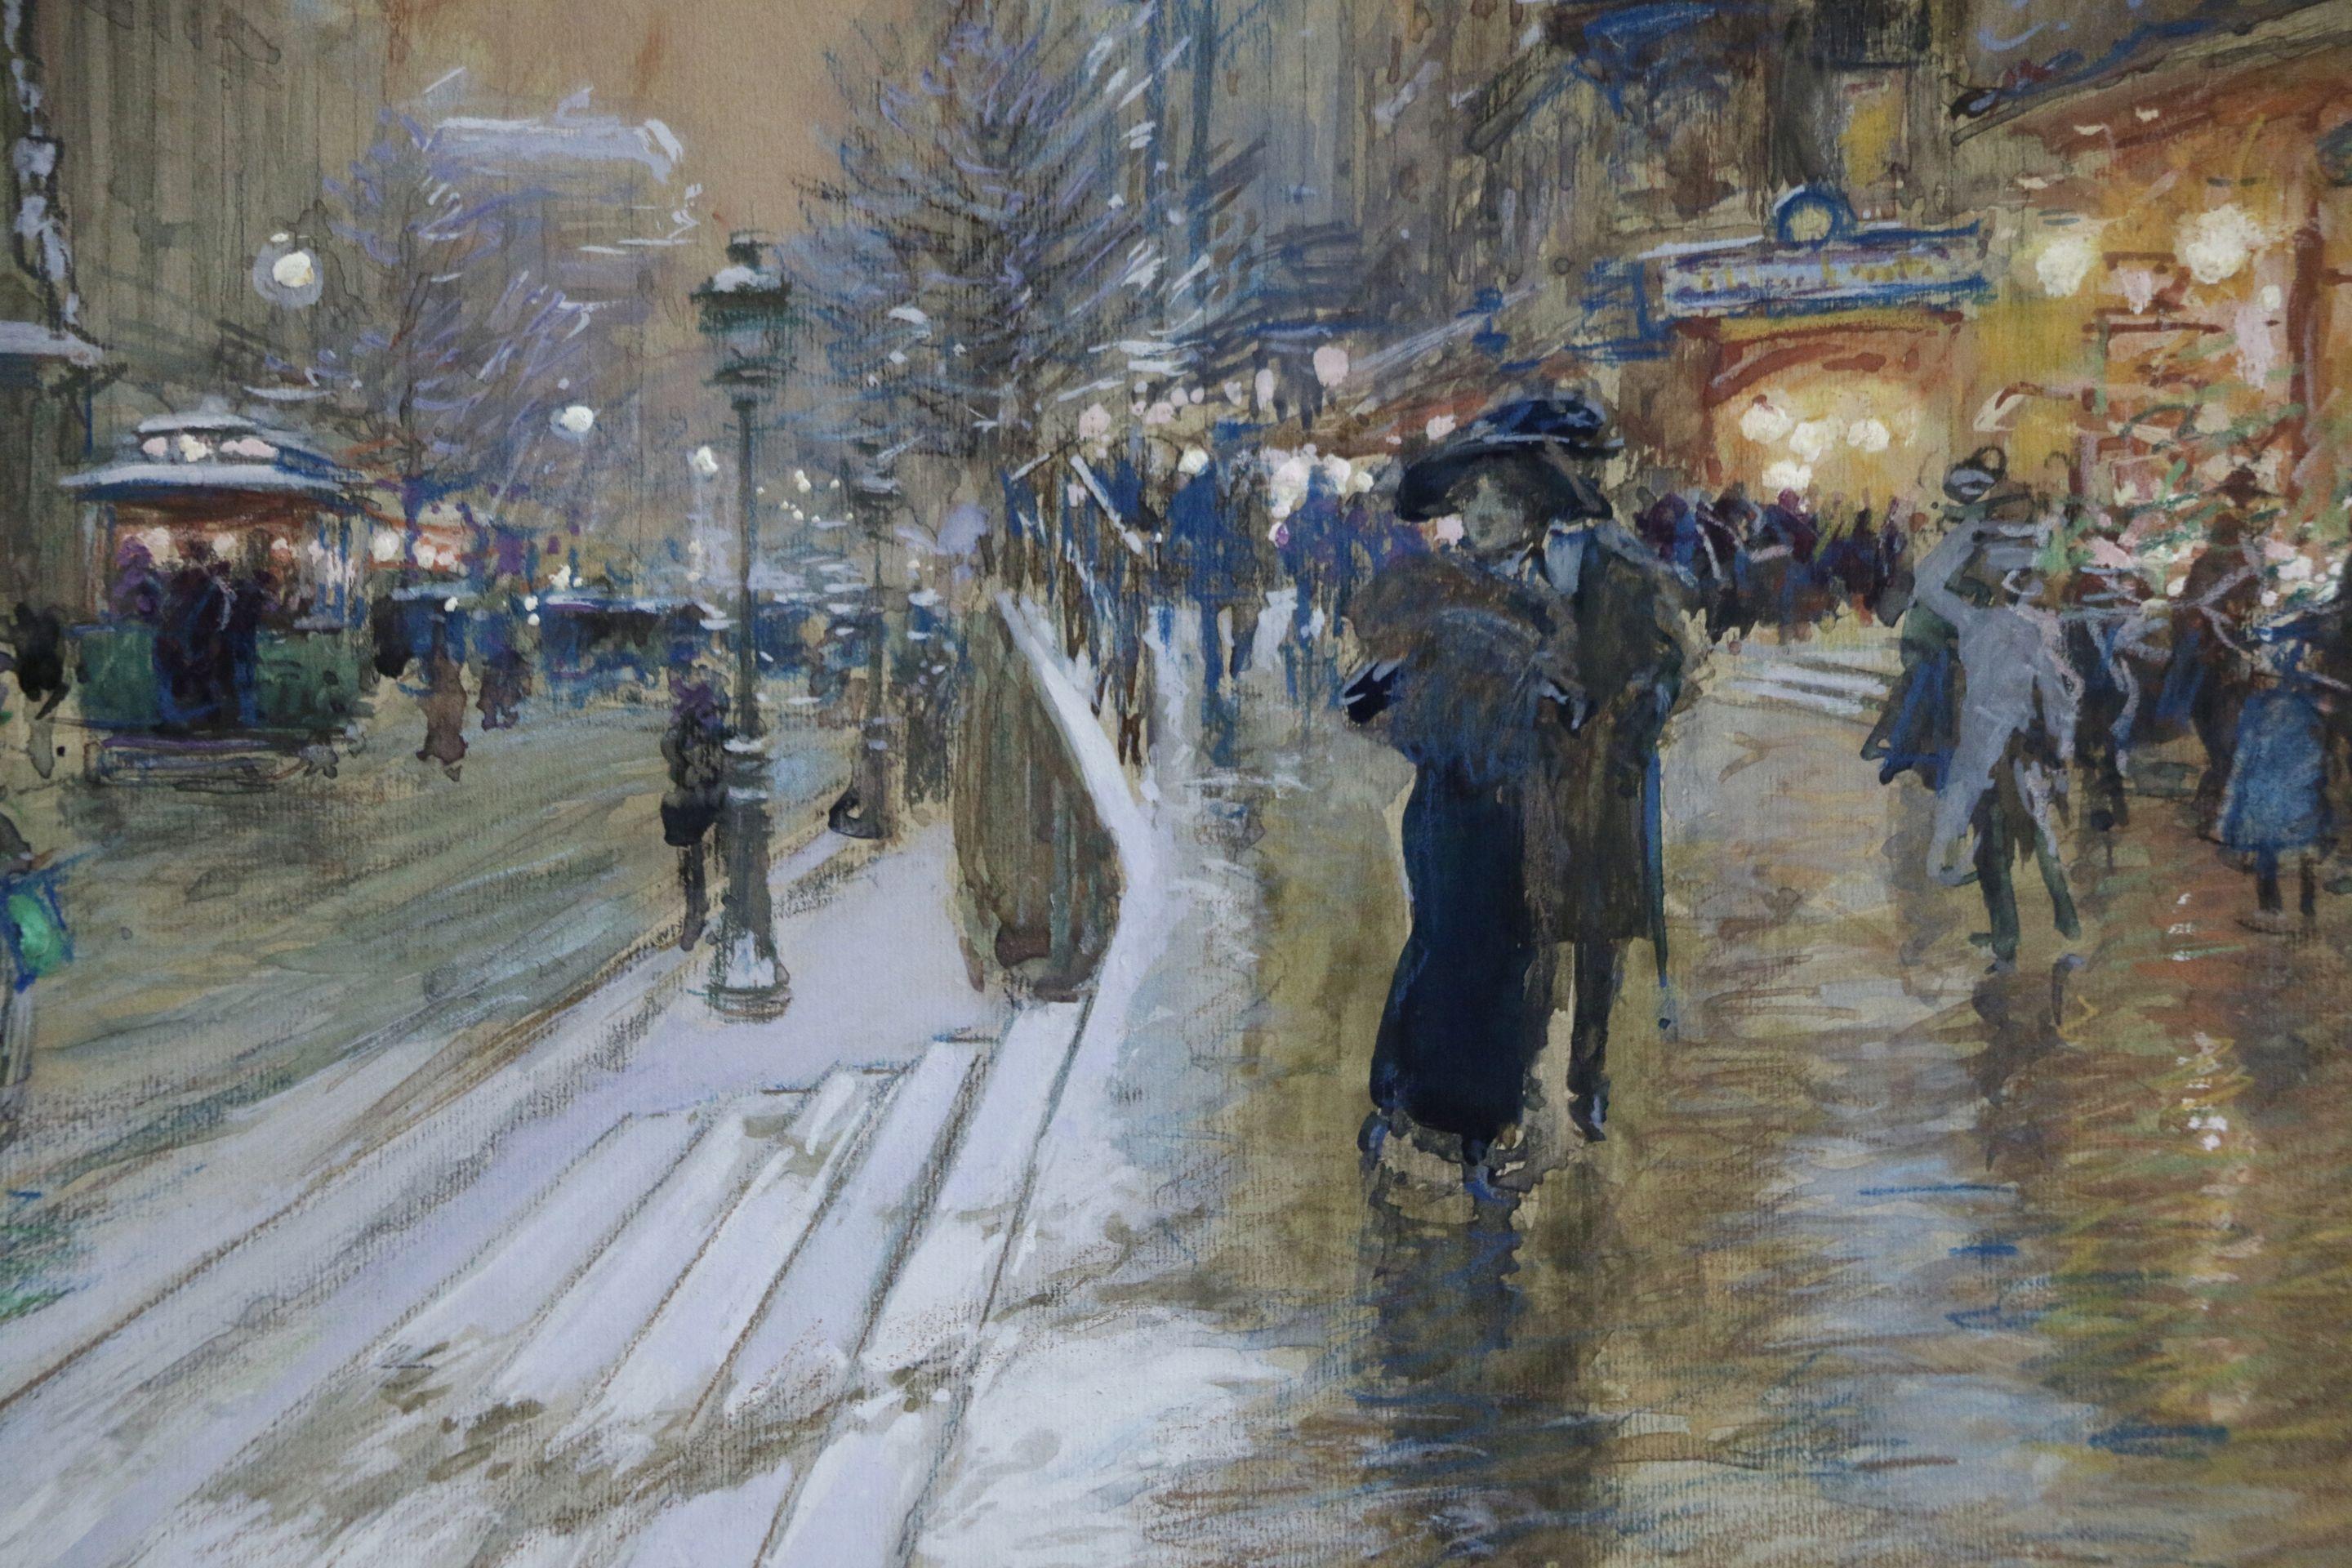 Evening-Porte Saint Denis, Paris - Figures in Cityscape at Nighttime by G Stein - Painting by Georges Stein